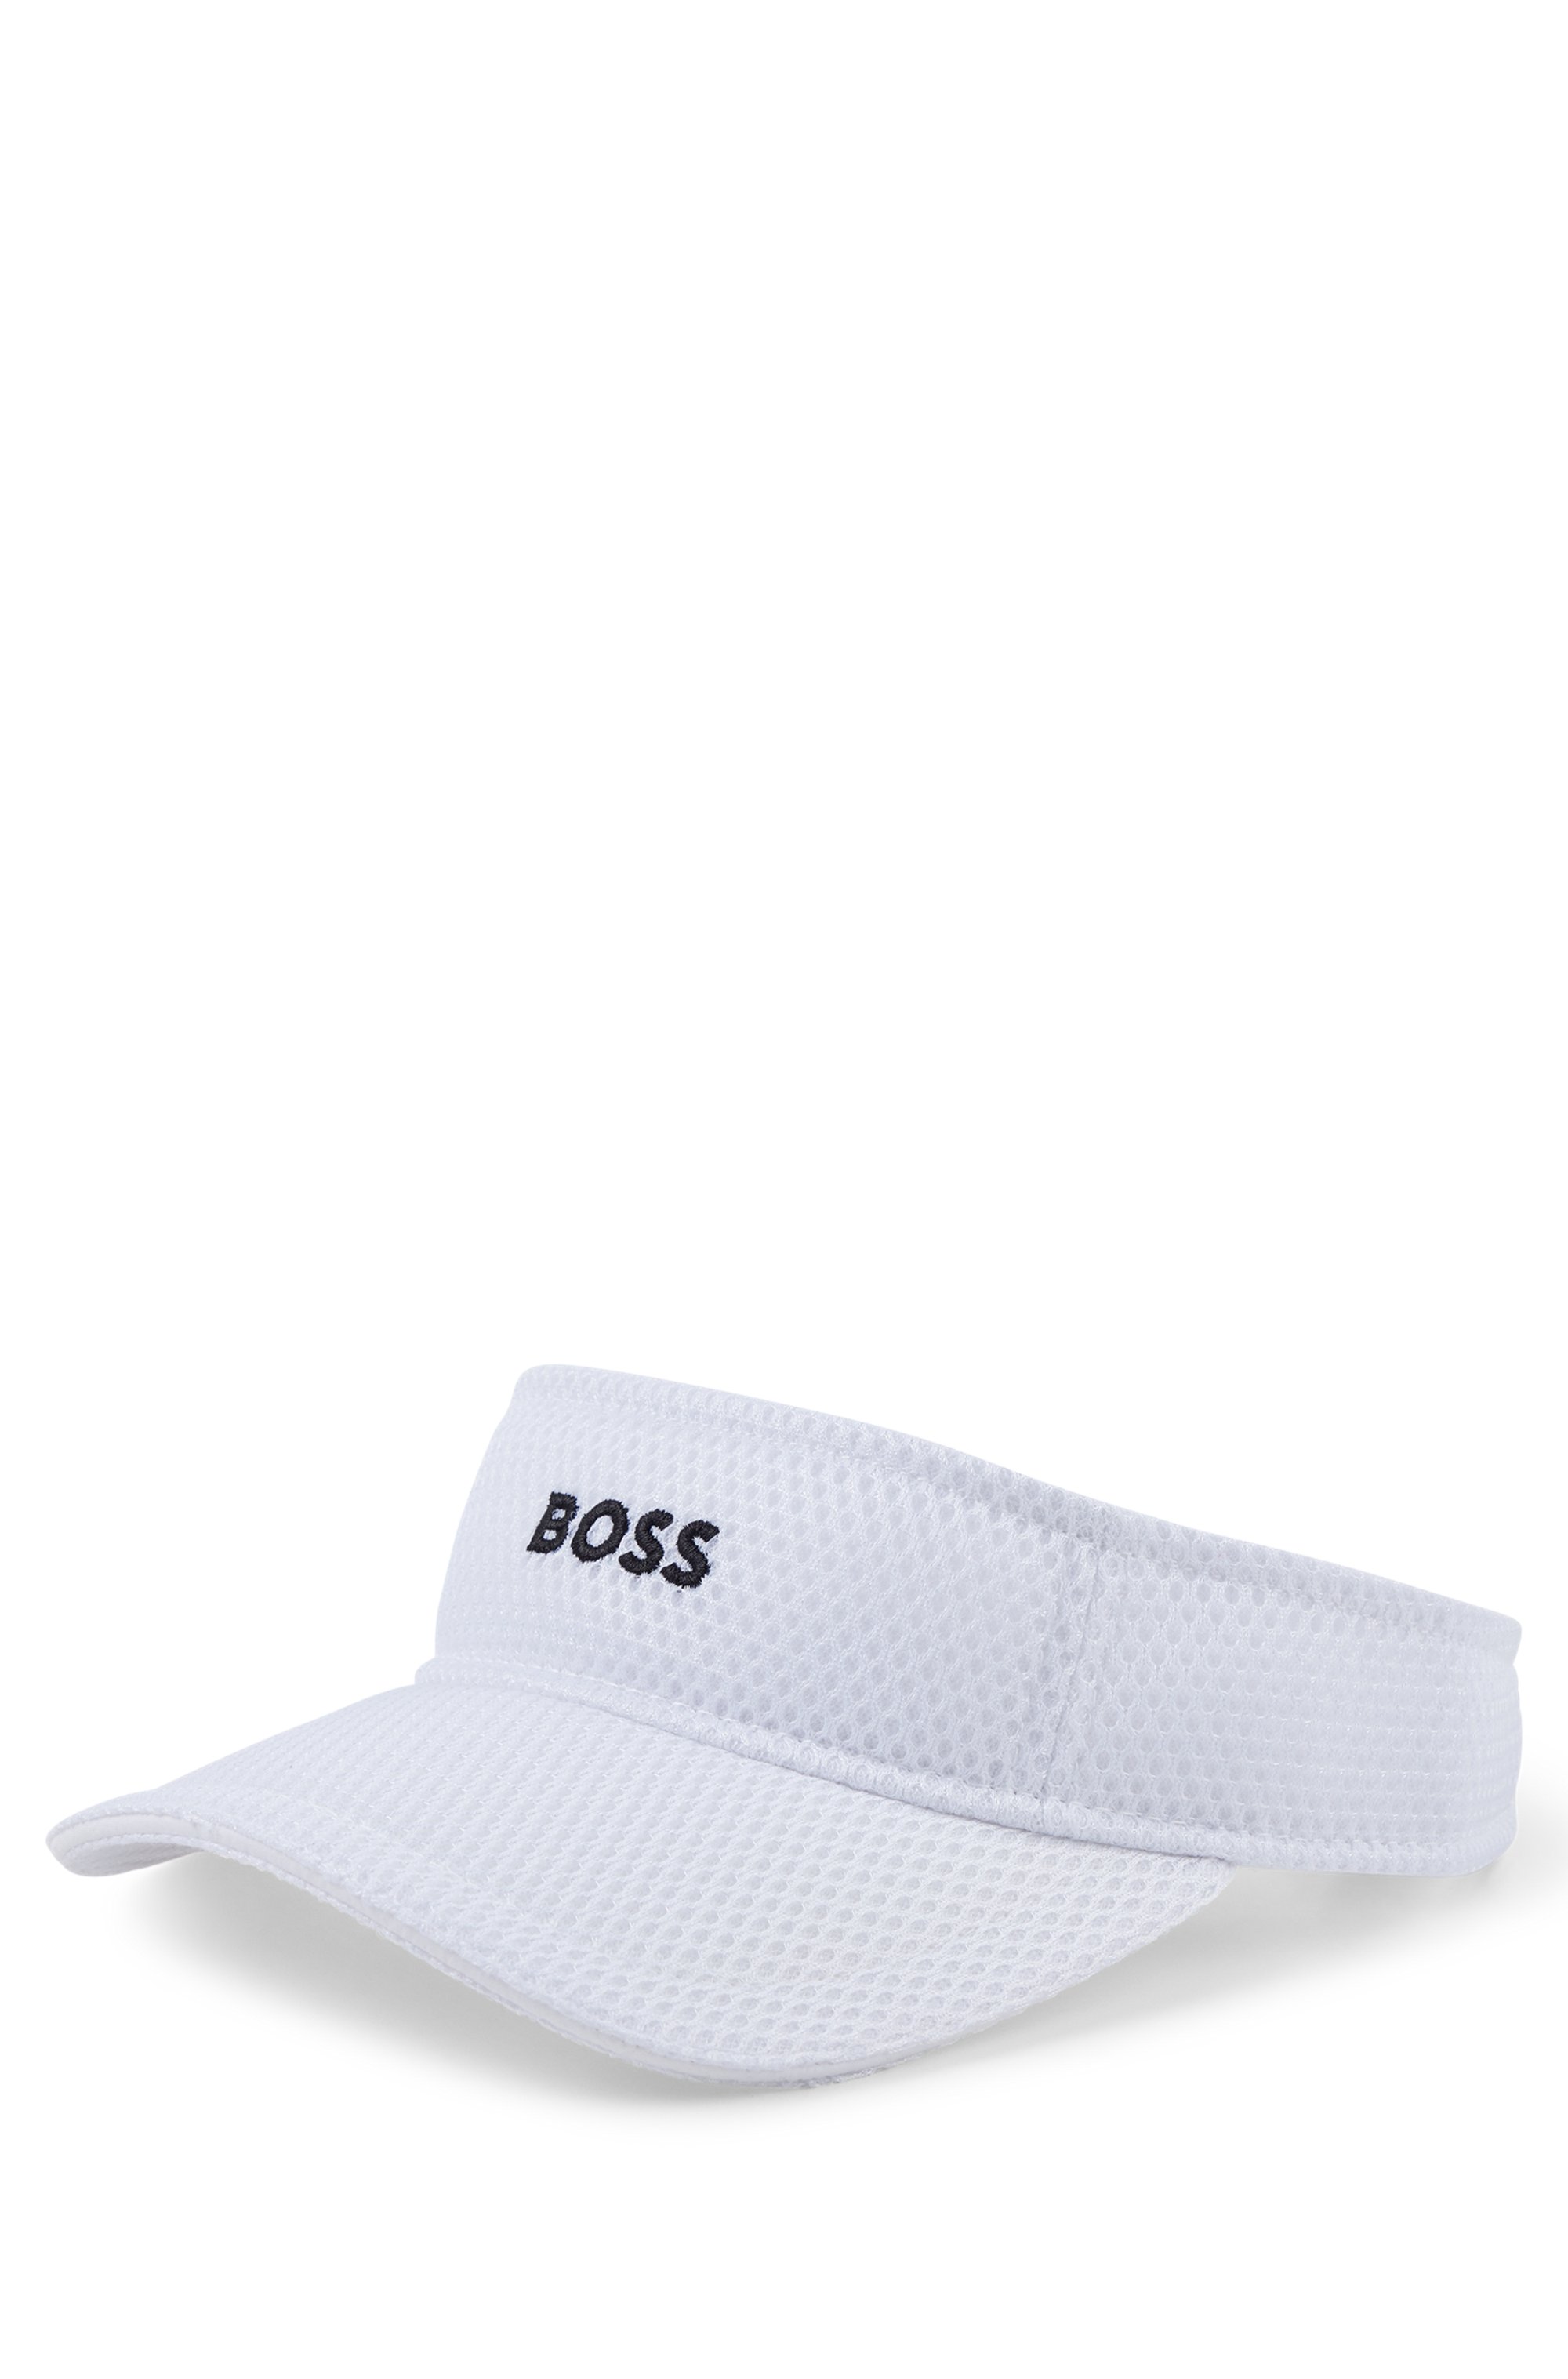 Contrast-logo visor in mesh fabric with signature flag, White